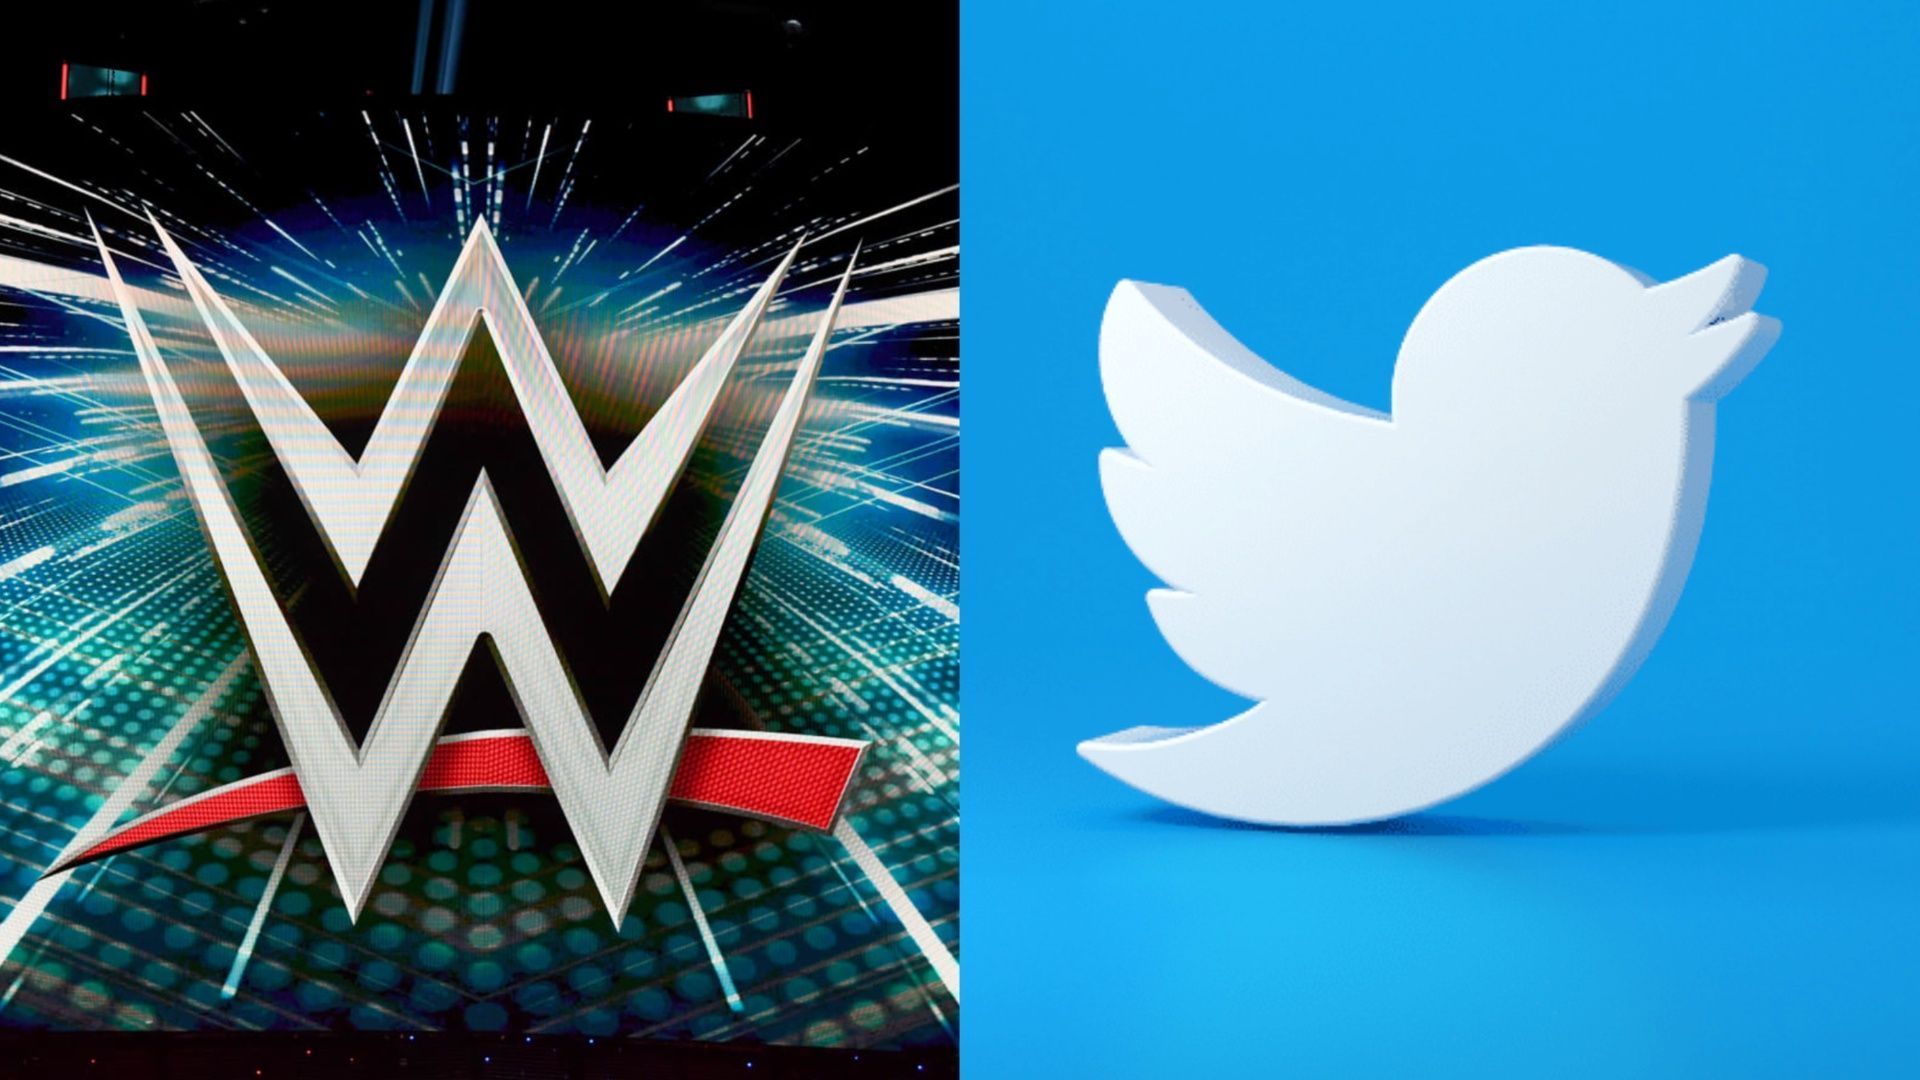 A current WWE Superstar is now back on Twitter.